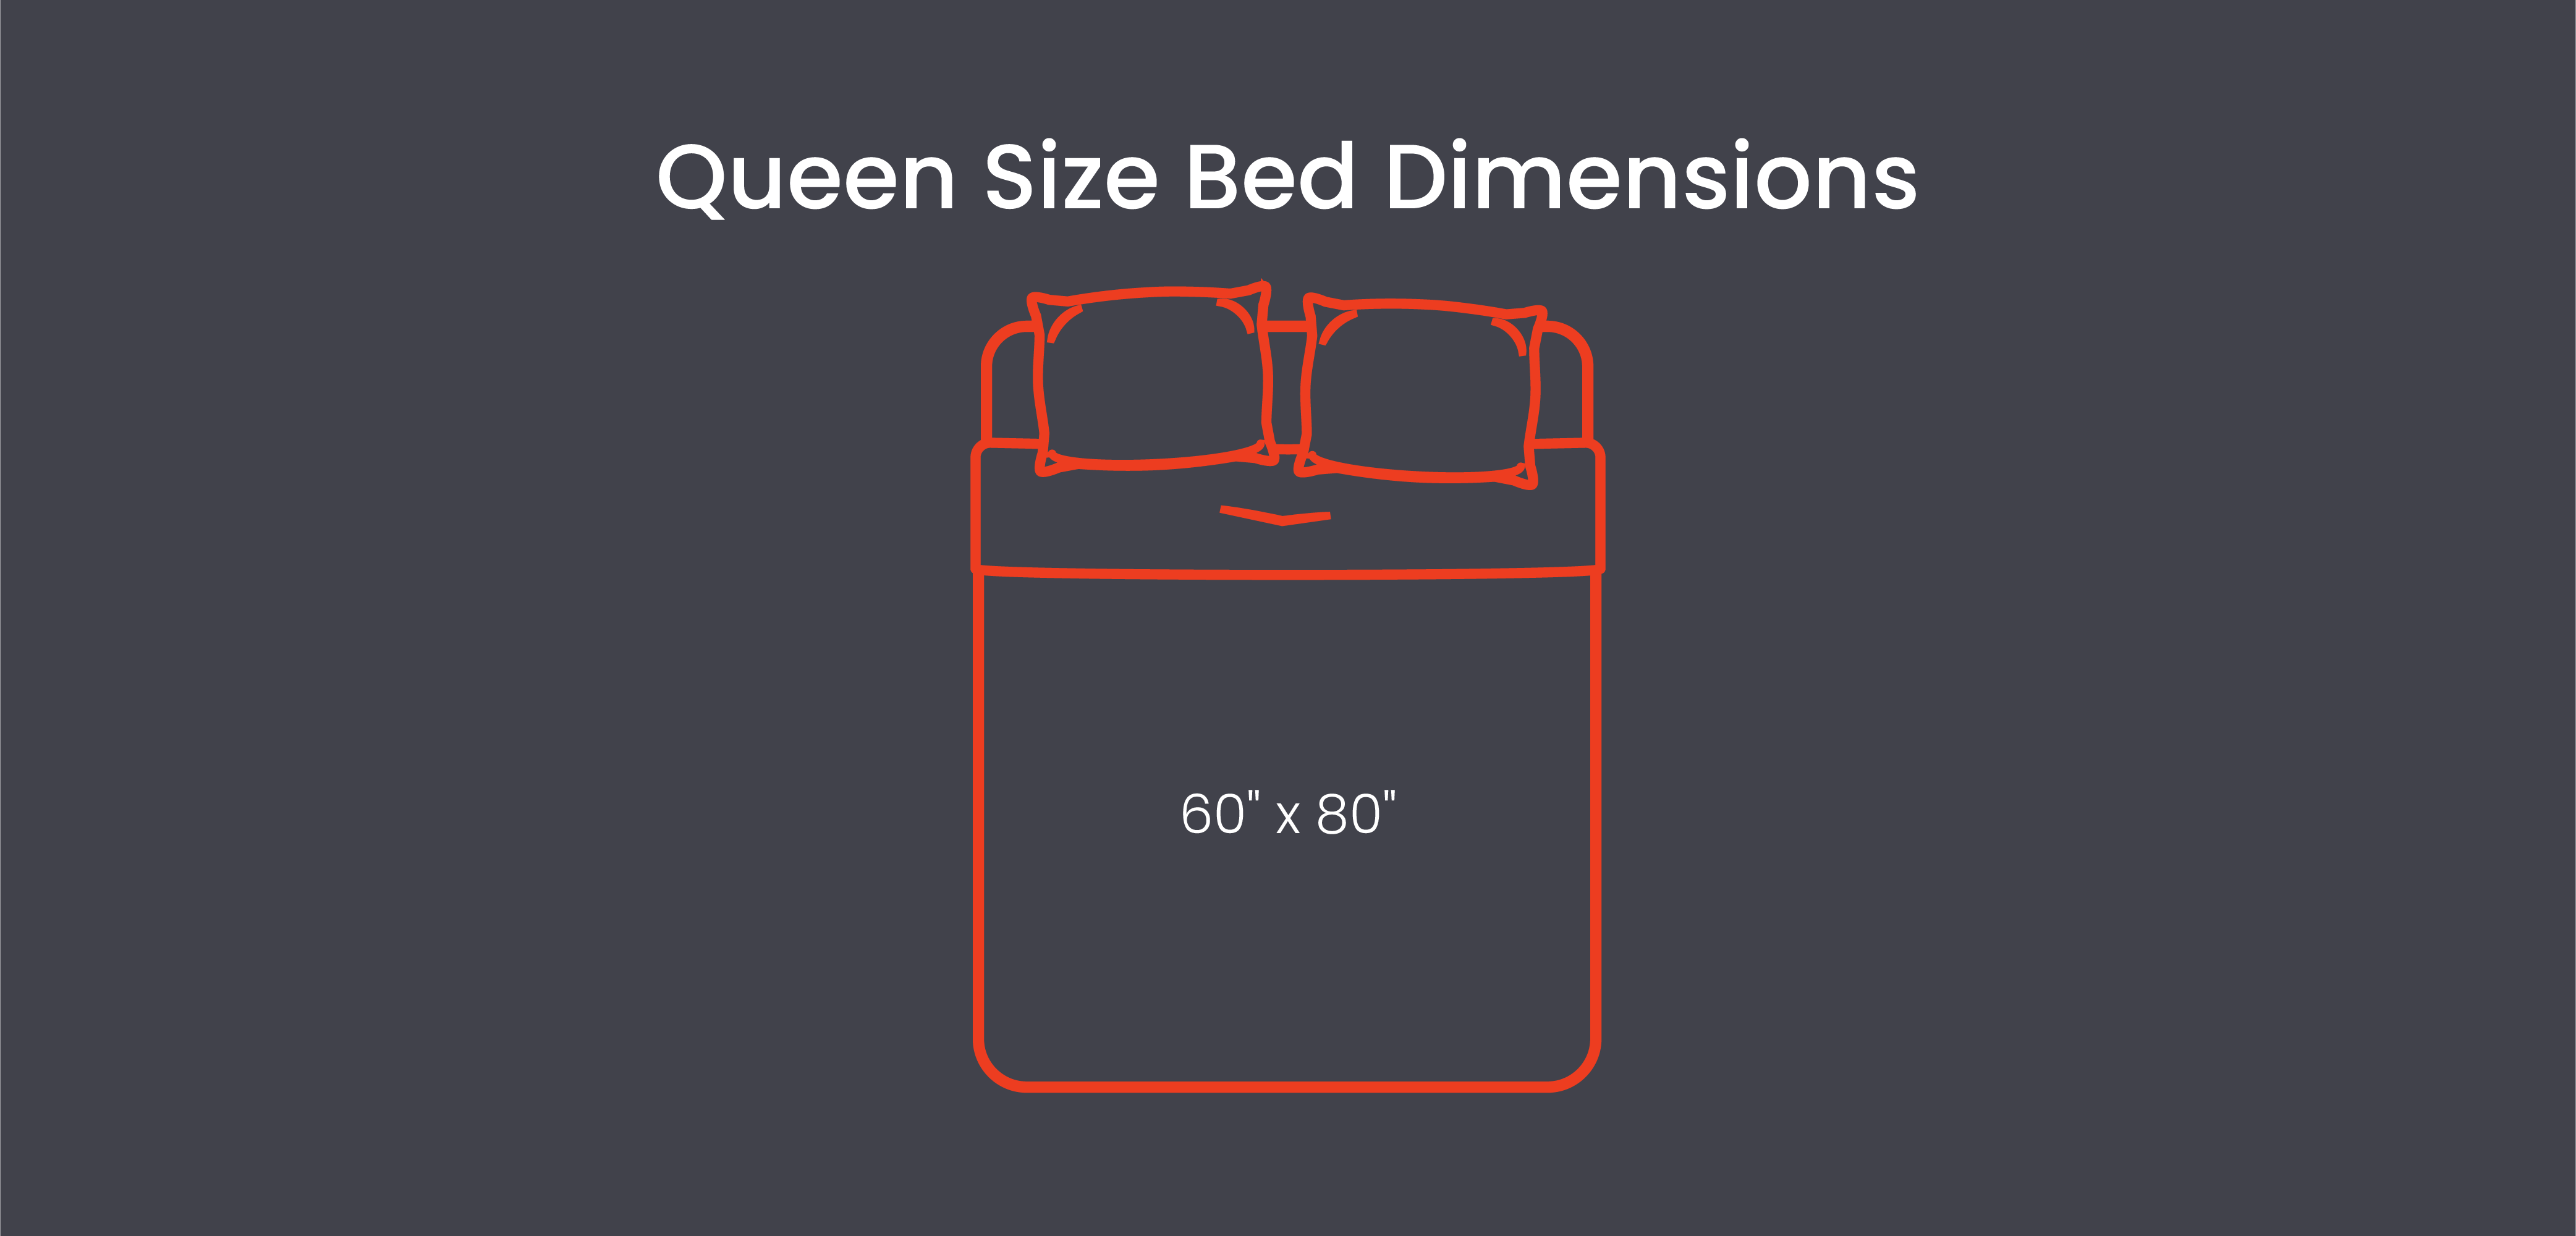 Queen size bed dimensions